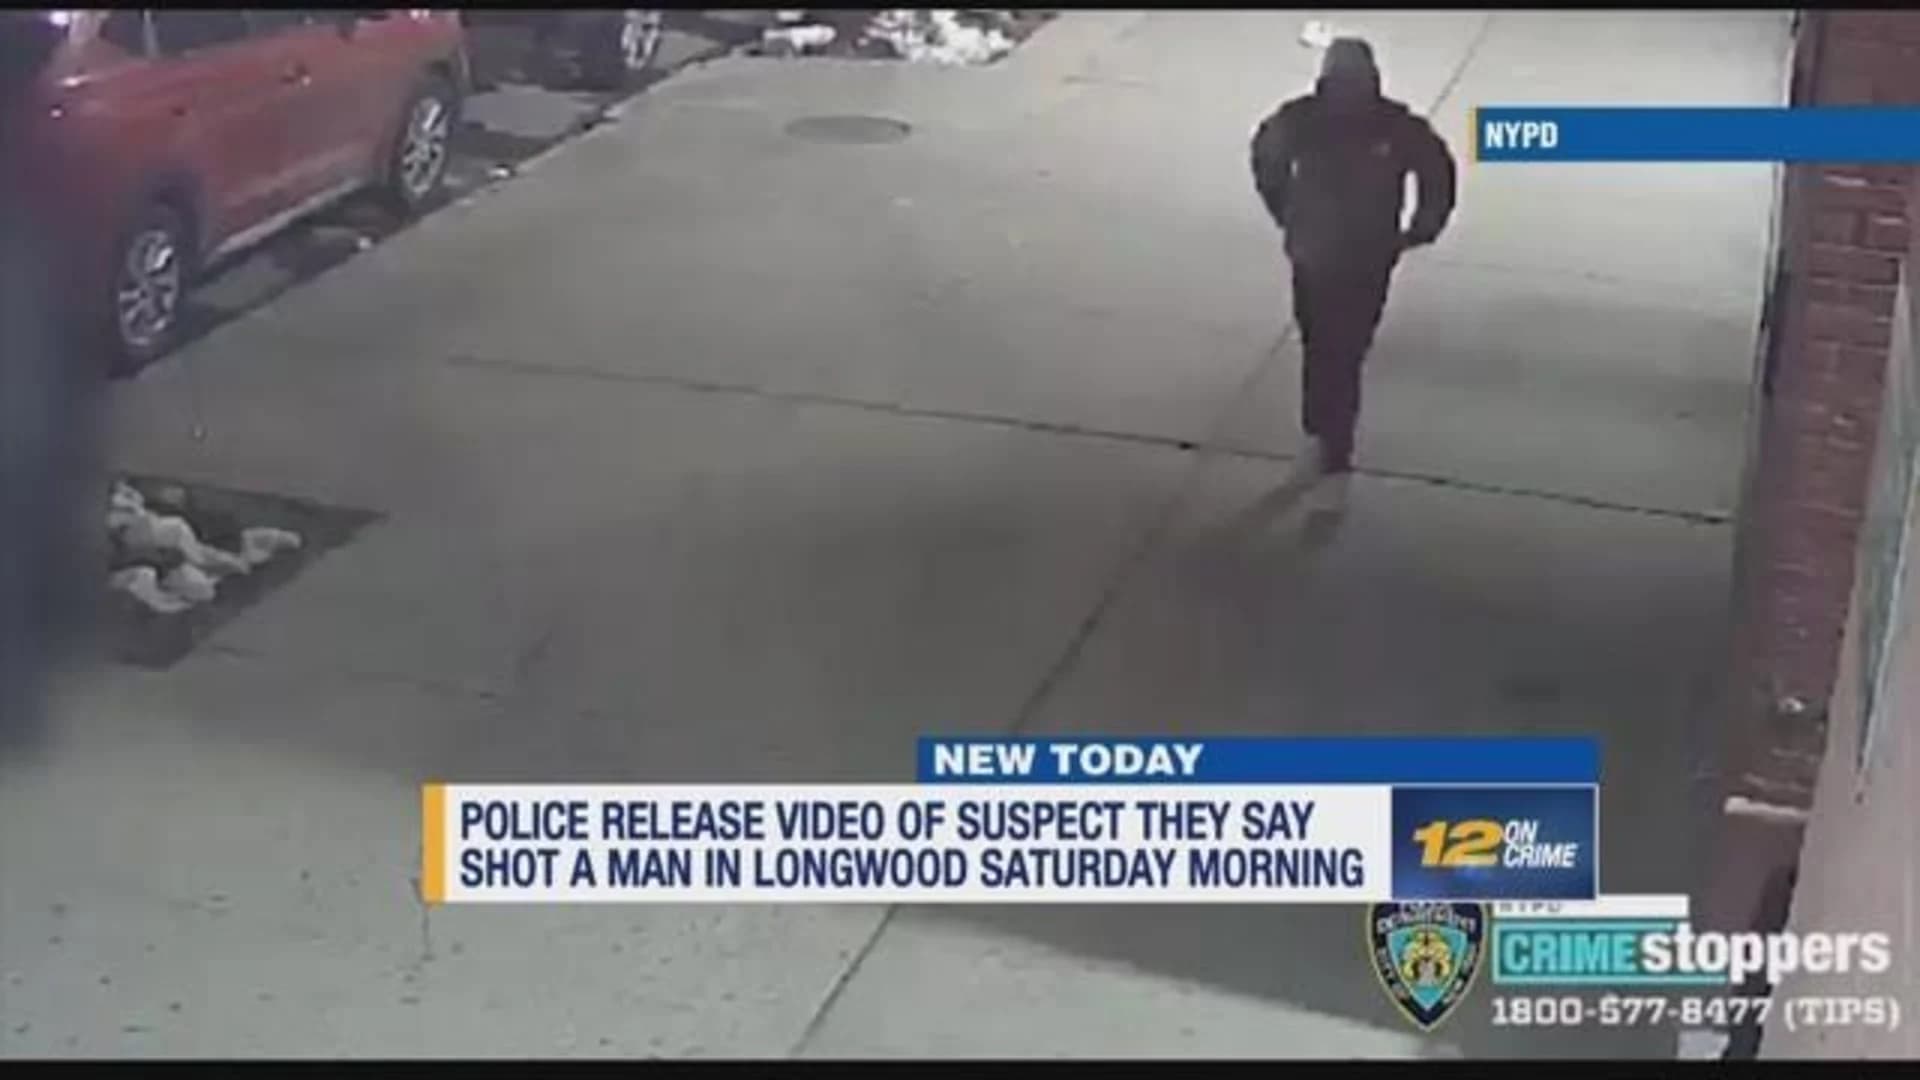 NYPD releases video of suspect in Longwood shooting